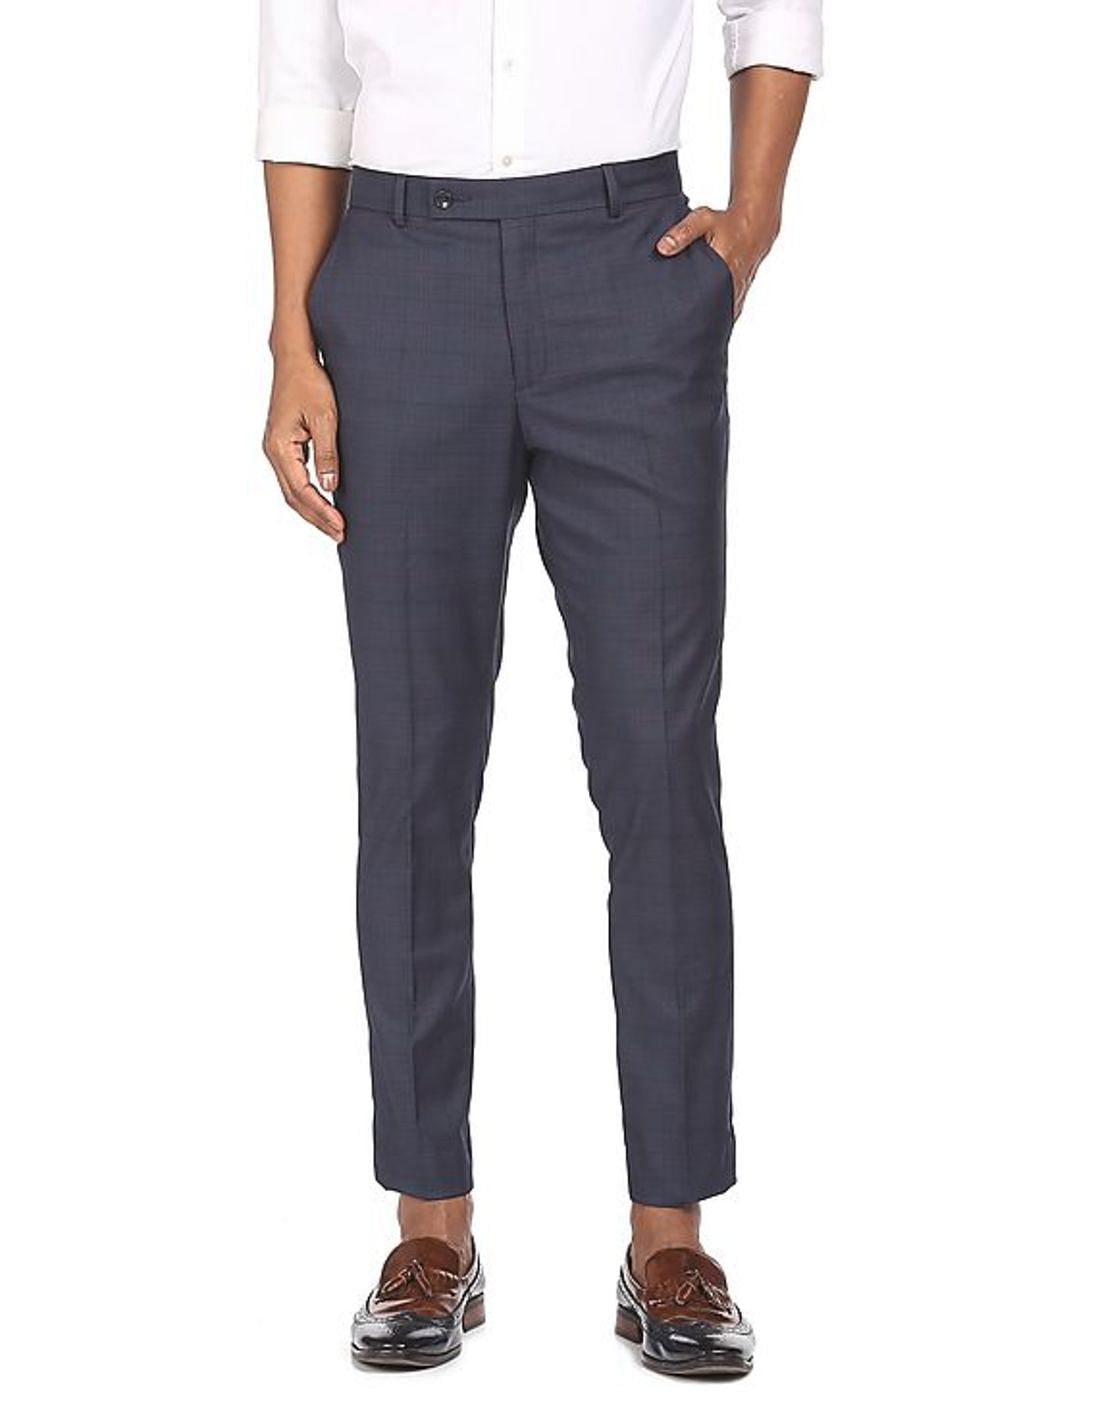 Discover 156+ branded formal trousers